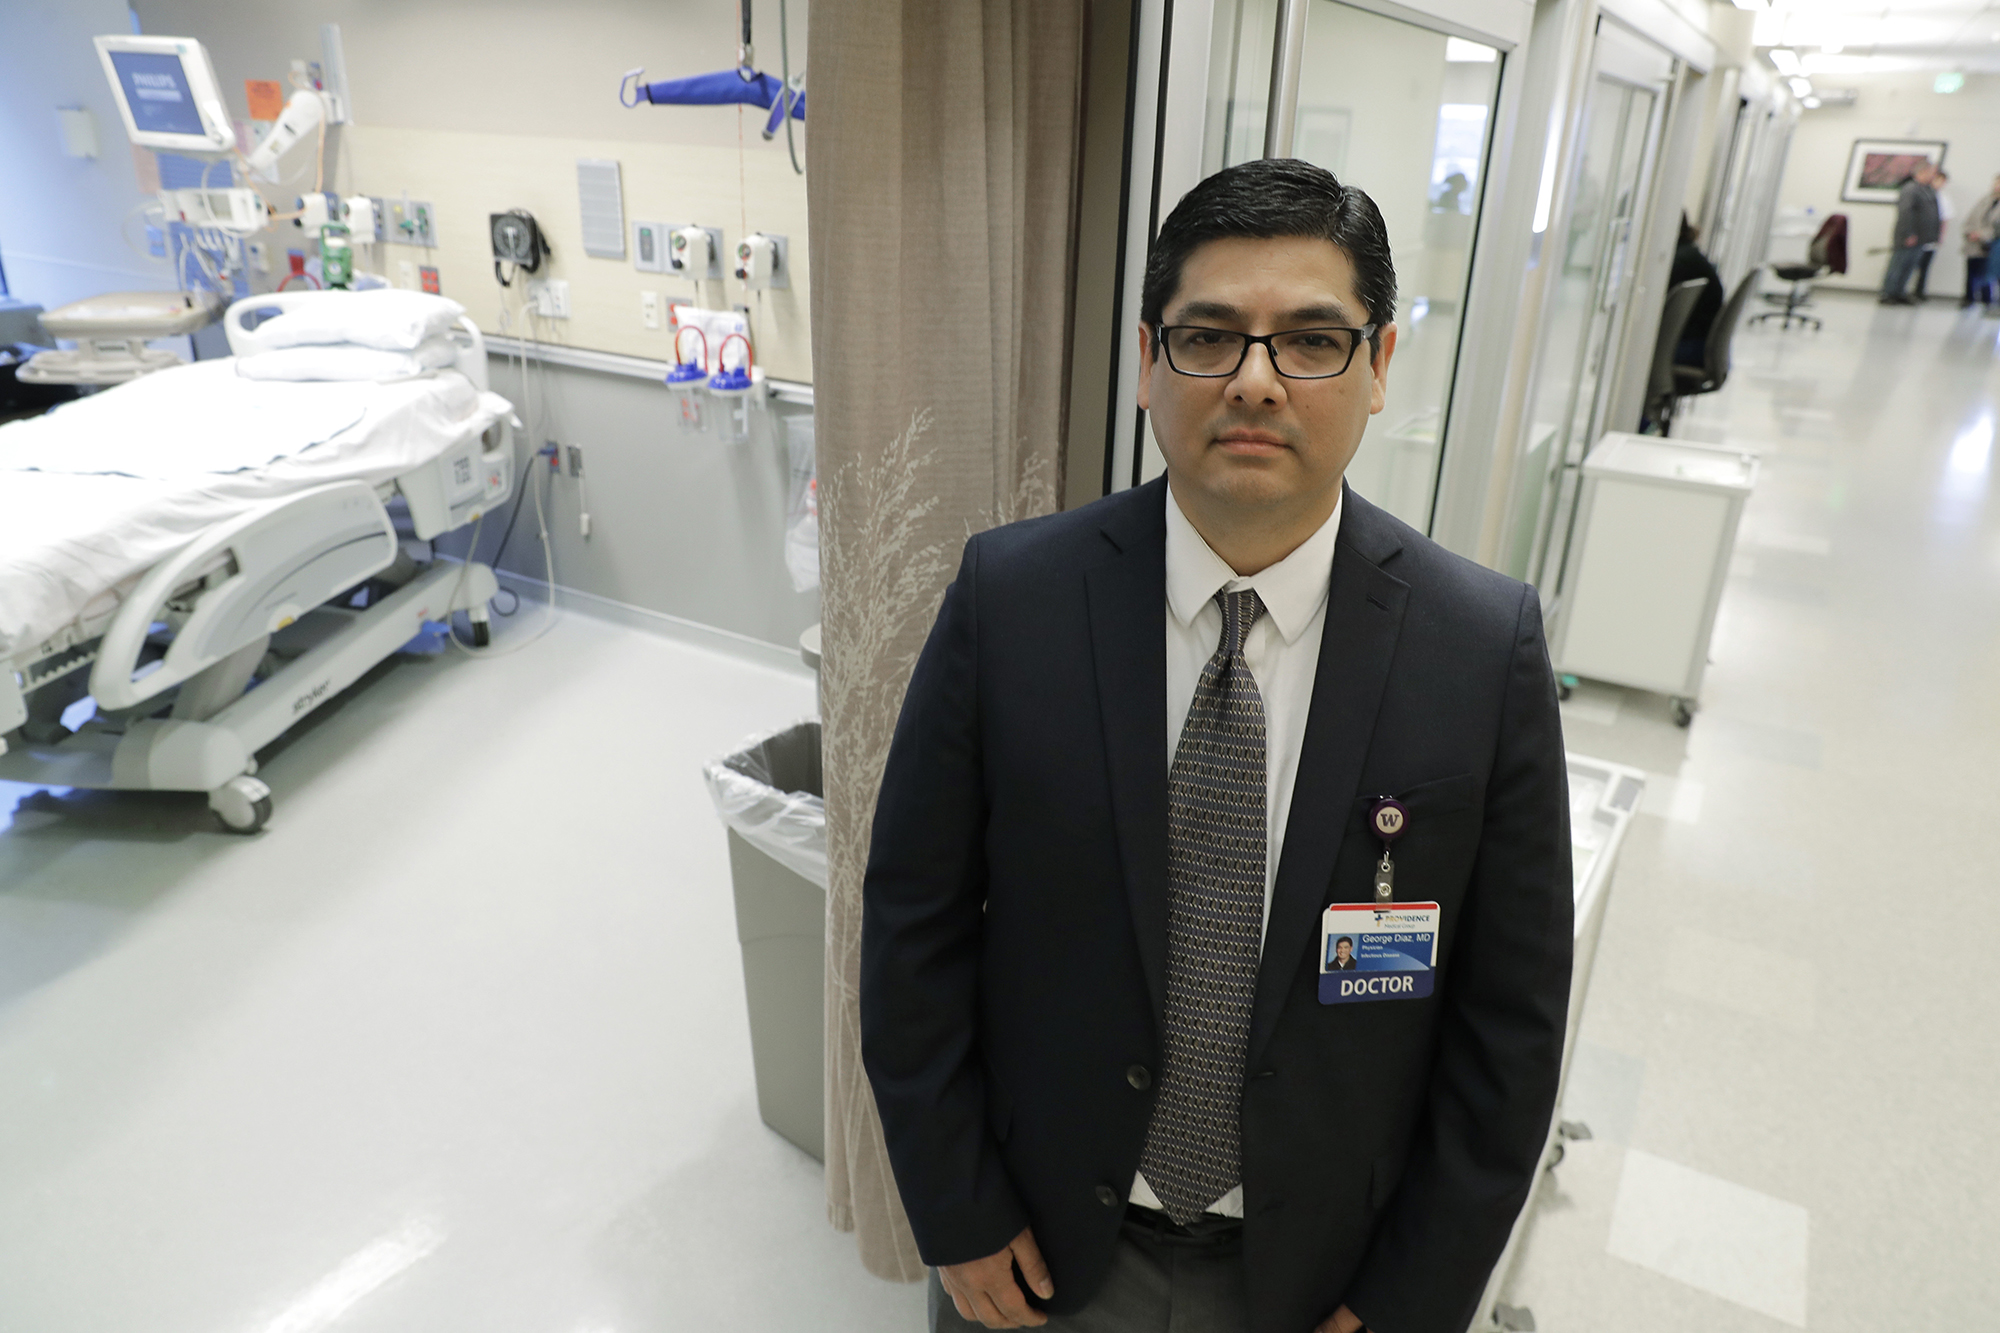 Dr. George Diaz, section chief for infectious diseases at Providence Regional Medical Center, poses for a photo in Everett, Wash, Jan. 23, 2020. Diaz was part of the team that treated the first U.S. patient infected with the new virus from China, who was admitted to the facility on Jan. 20, 2020. The hospital released a statement Monday, Feb. 3, 2020, from the unidentified 35-year-old man that said he has left the hospital and is now in isolation at home, and will be monitored by officials with the Snohomish Health District in coordination with the hospital. (Ted S. Warren/AP)